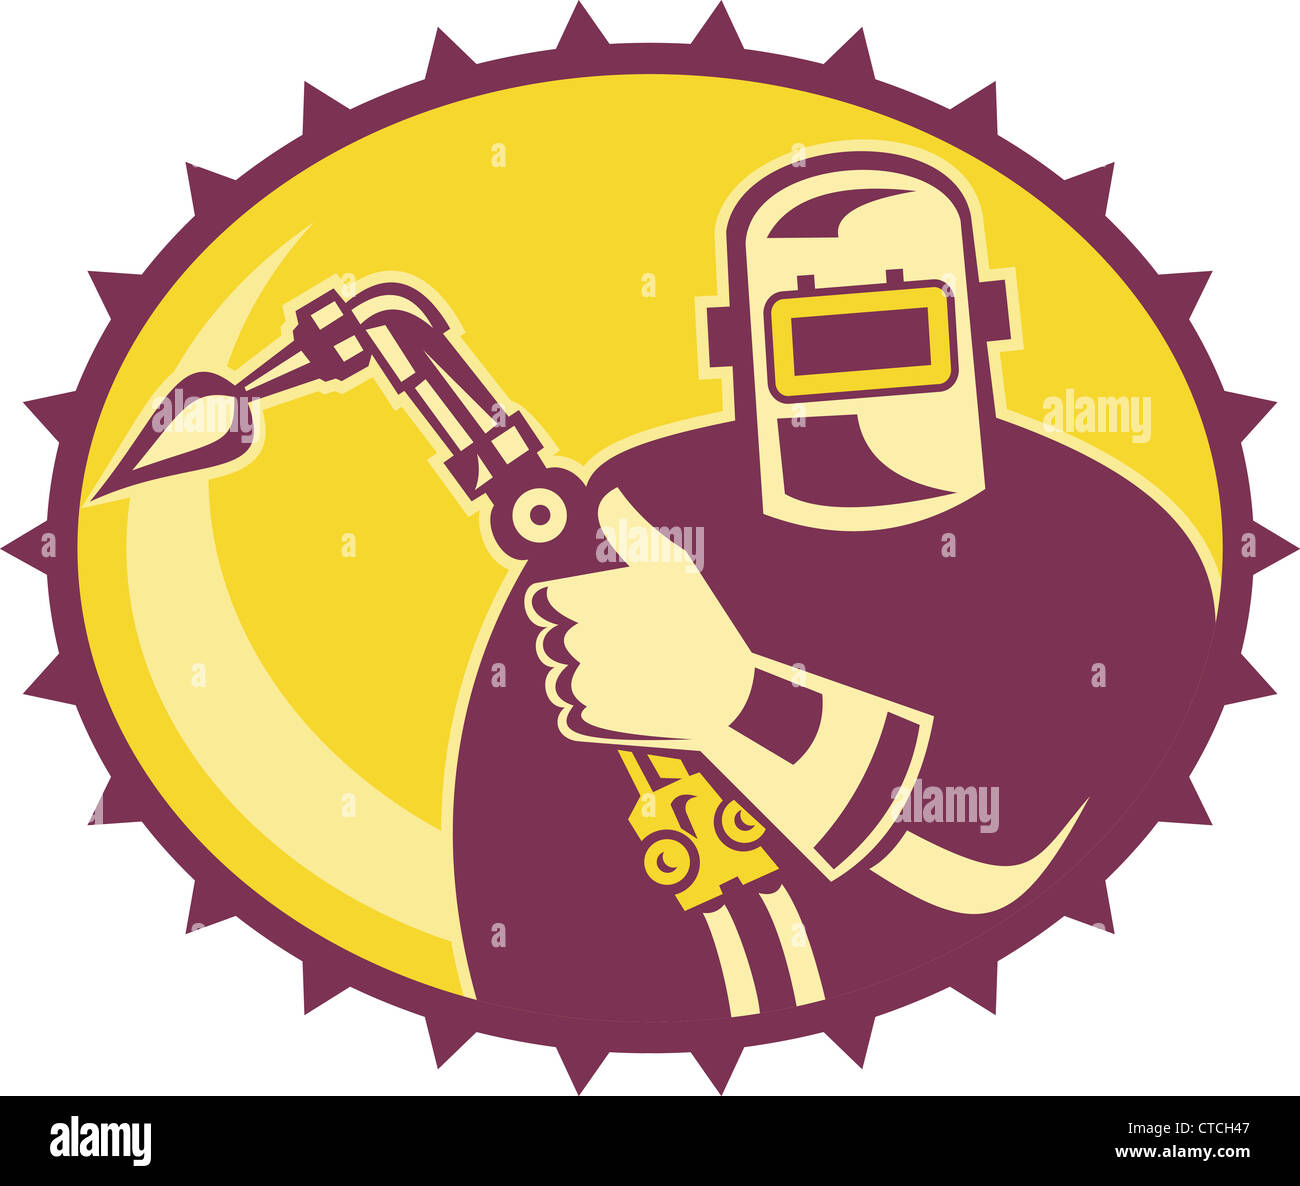 Illustration of a welder worker fabricator with welding torch set inside ellipse done in retro style. Stock Photo